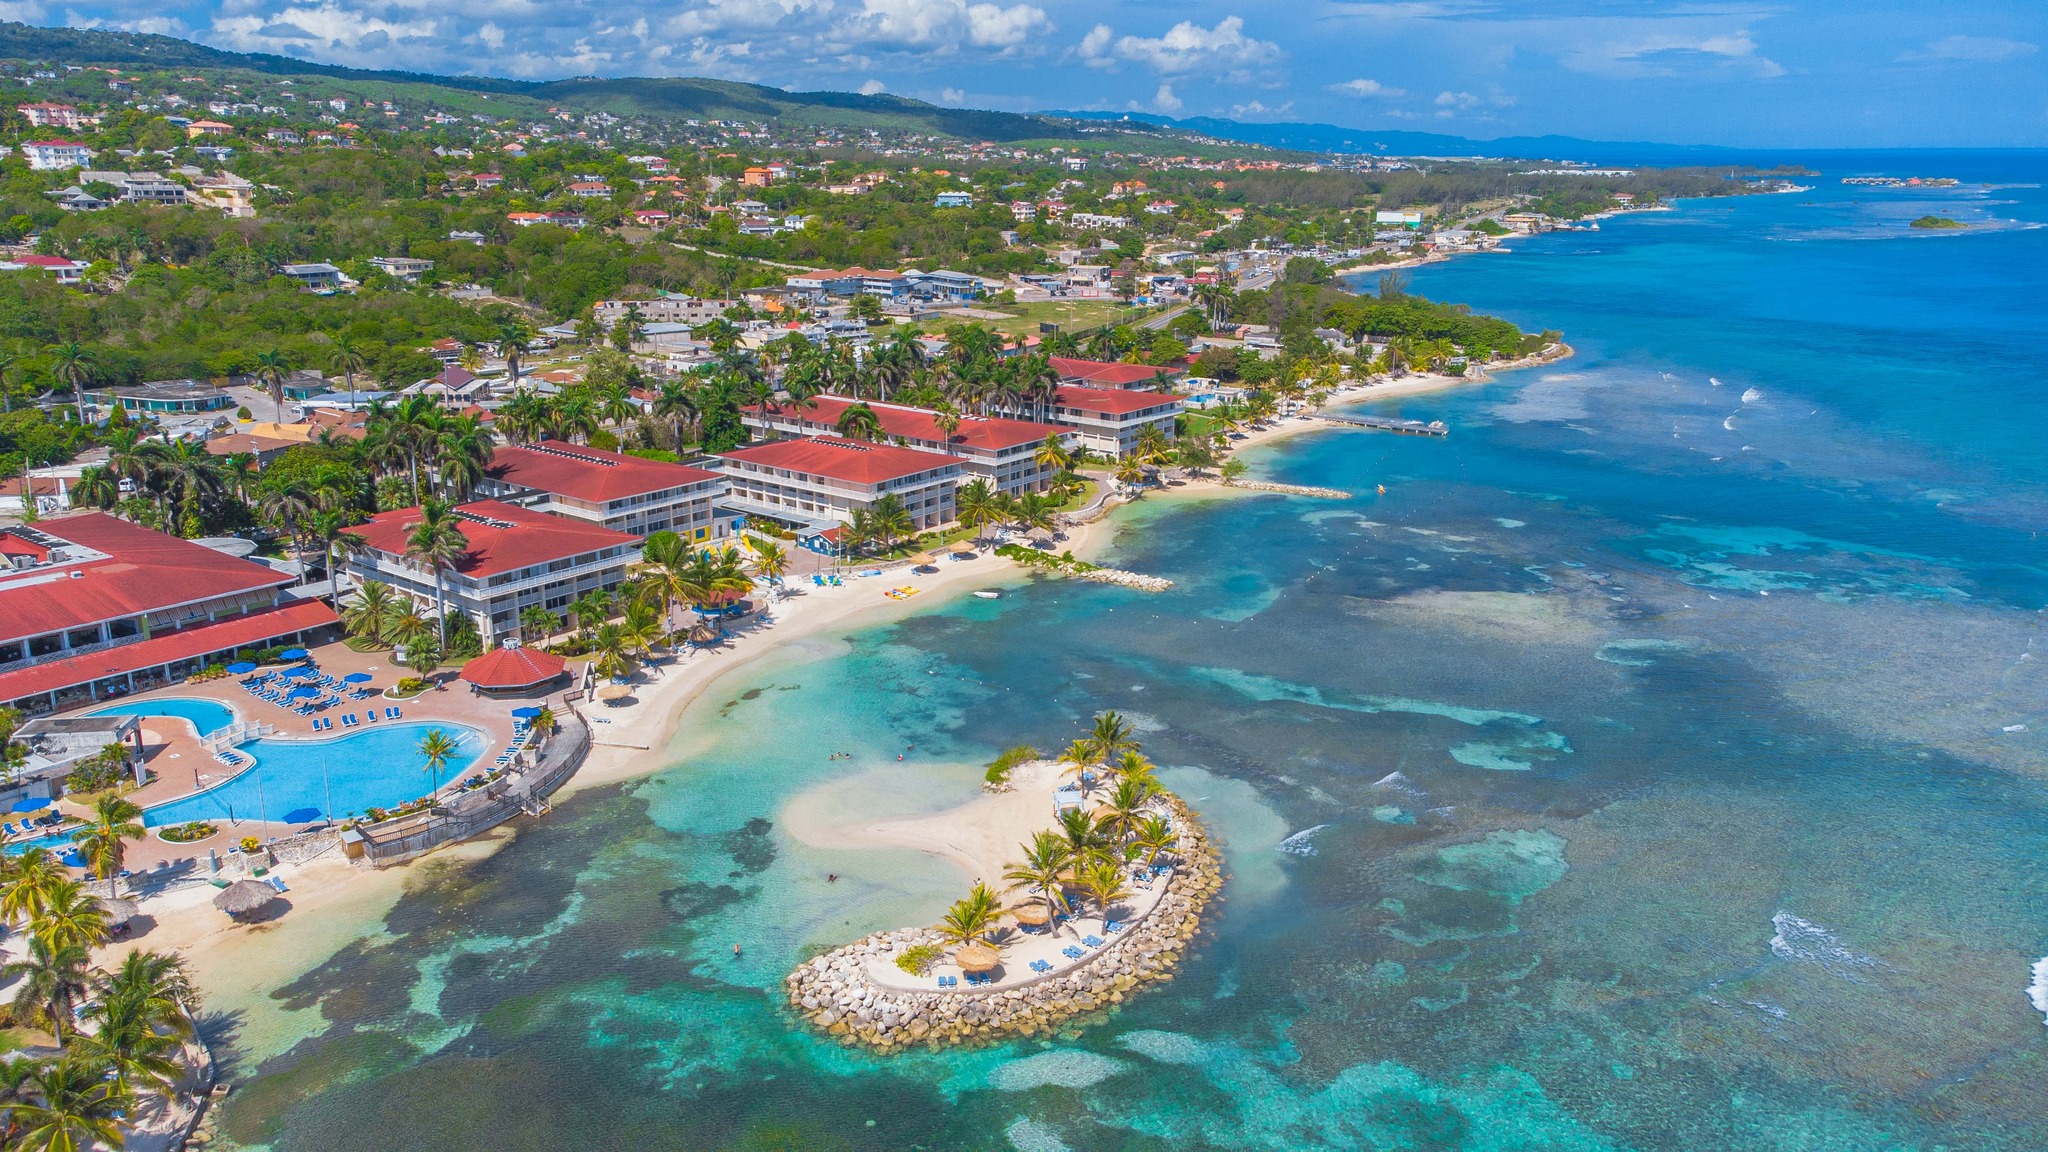 Holiday Inn Resort in Montego Bay, Jamaica. a family favorite resort close to the Sangster International Airport. 